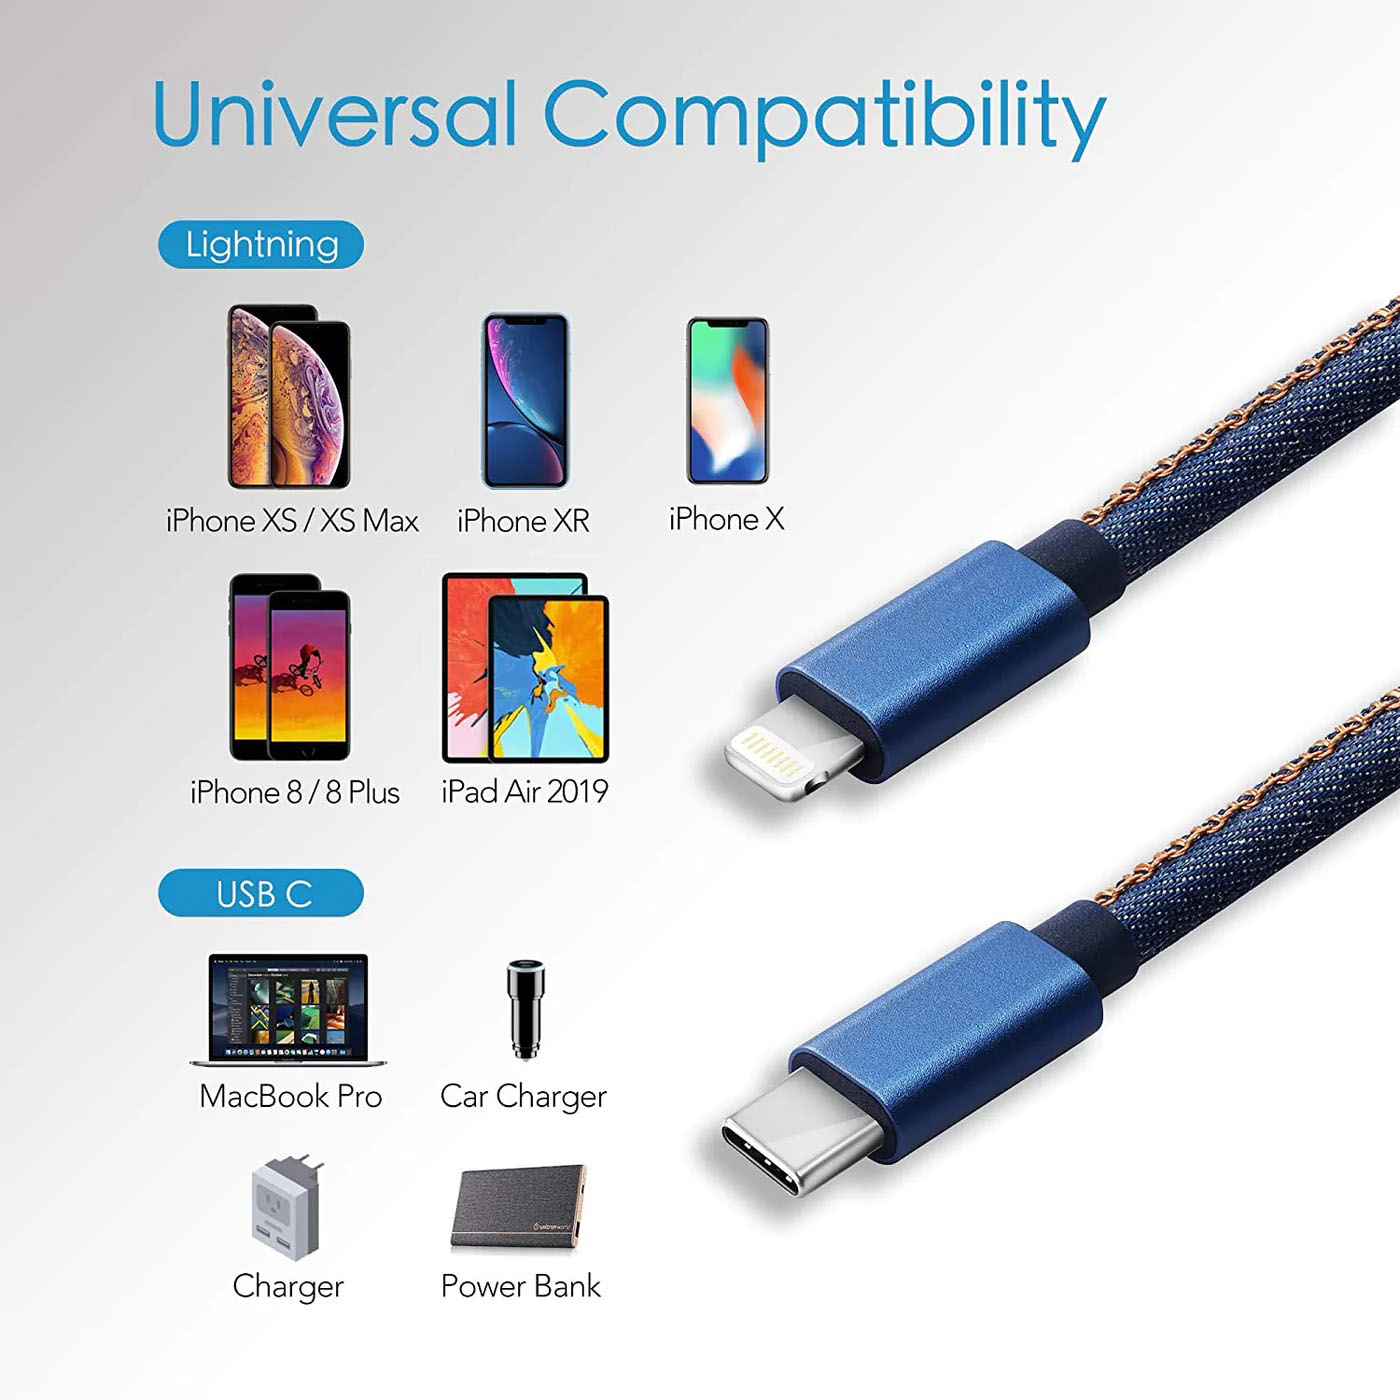 6. Denim Jean Lightning to USB type C Cable detailed information by Union Power America Inc. - Union Power (Yangzhou)Co., Ltd. Bulk Purchase and Corporate purchase contact us today(Slide Show)